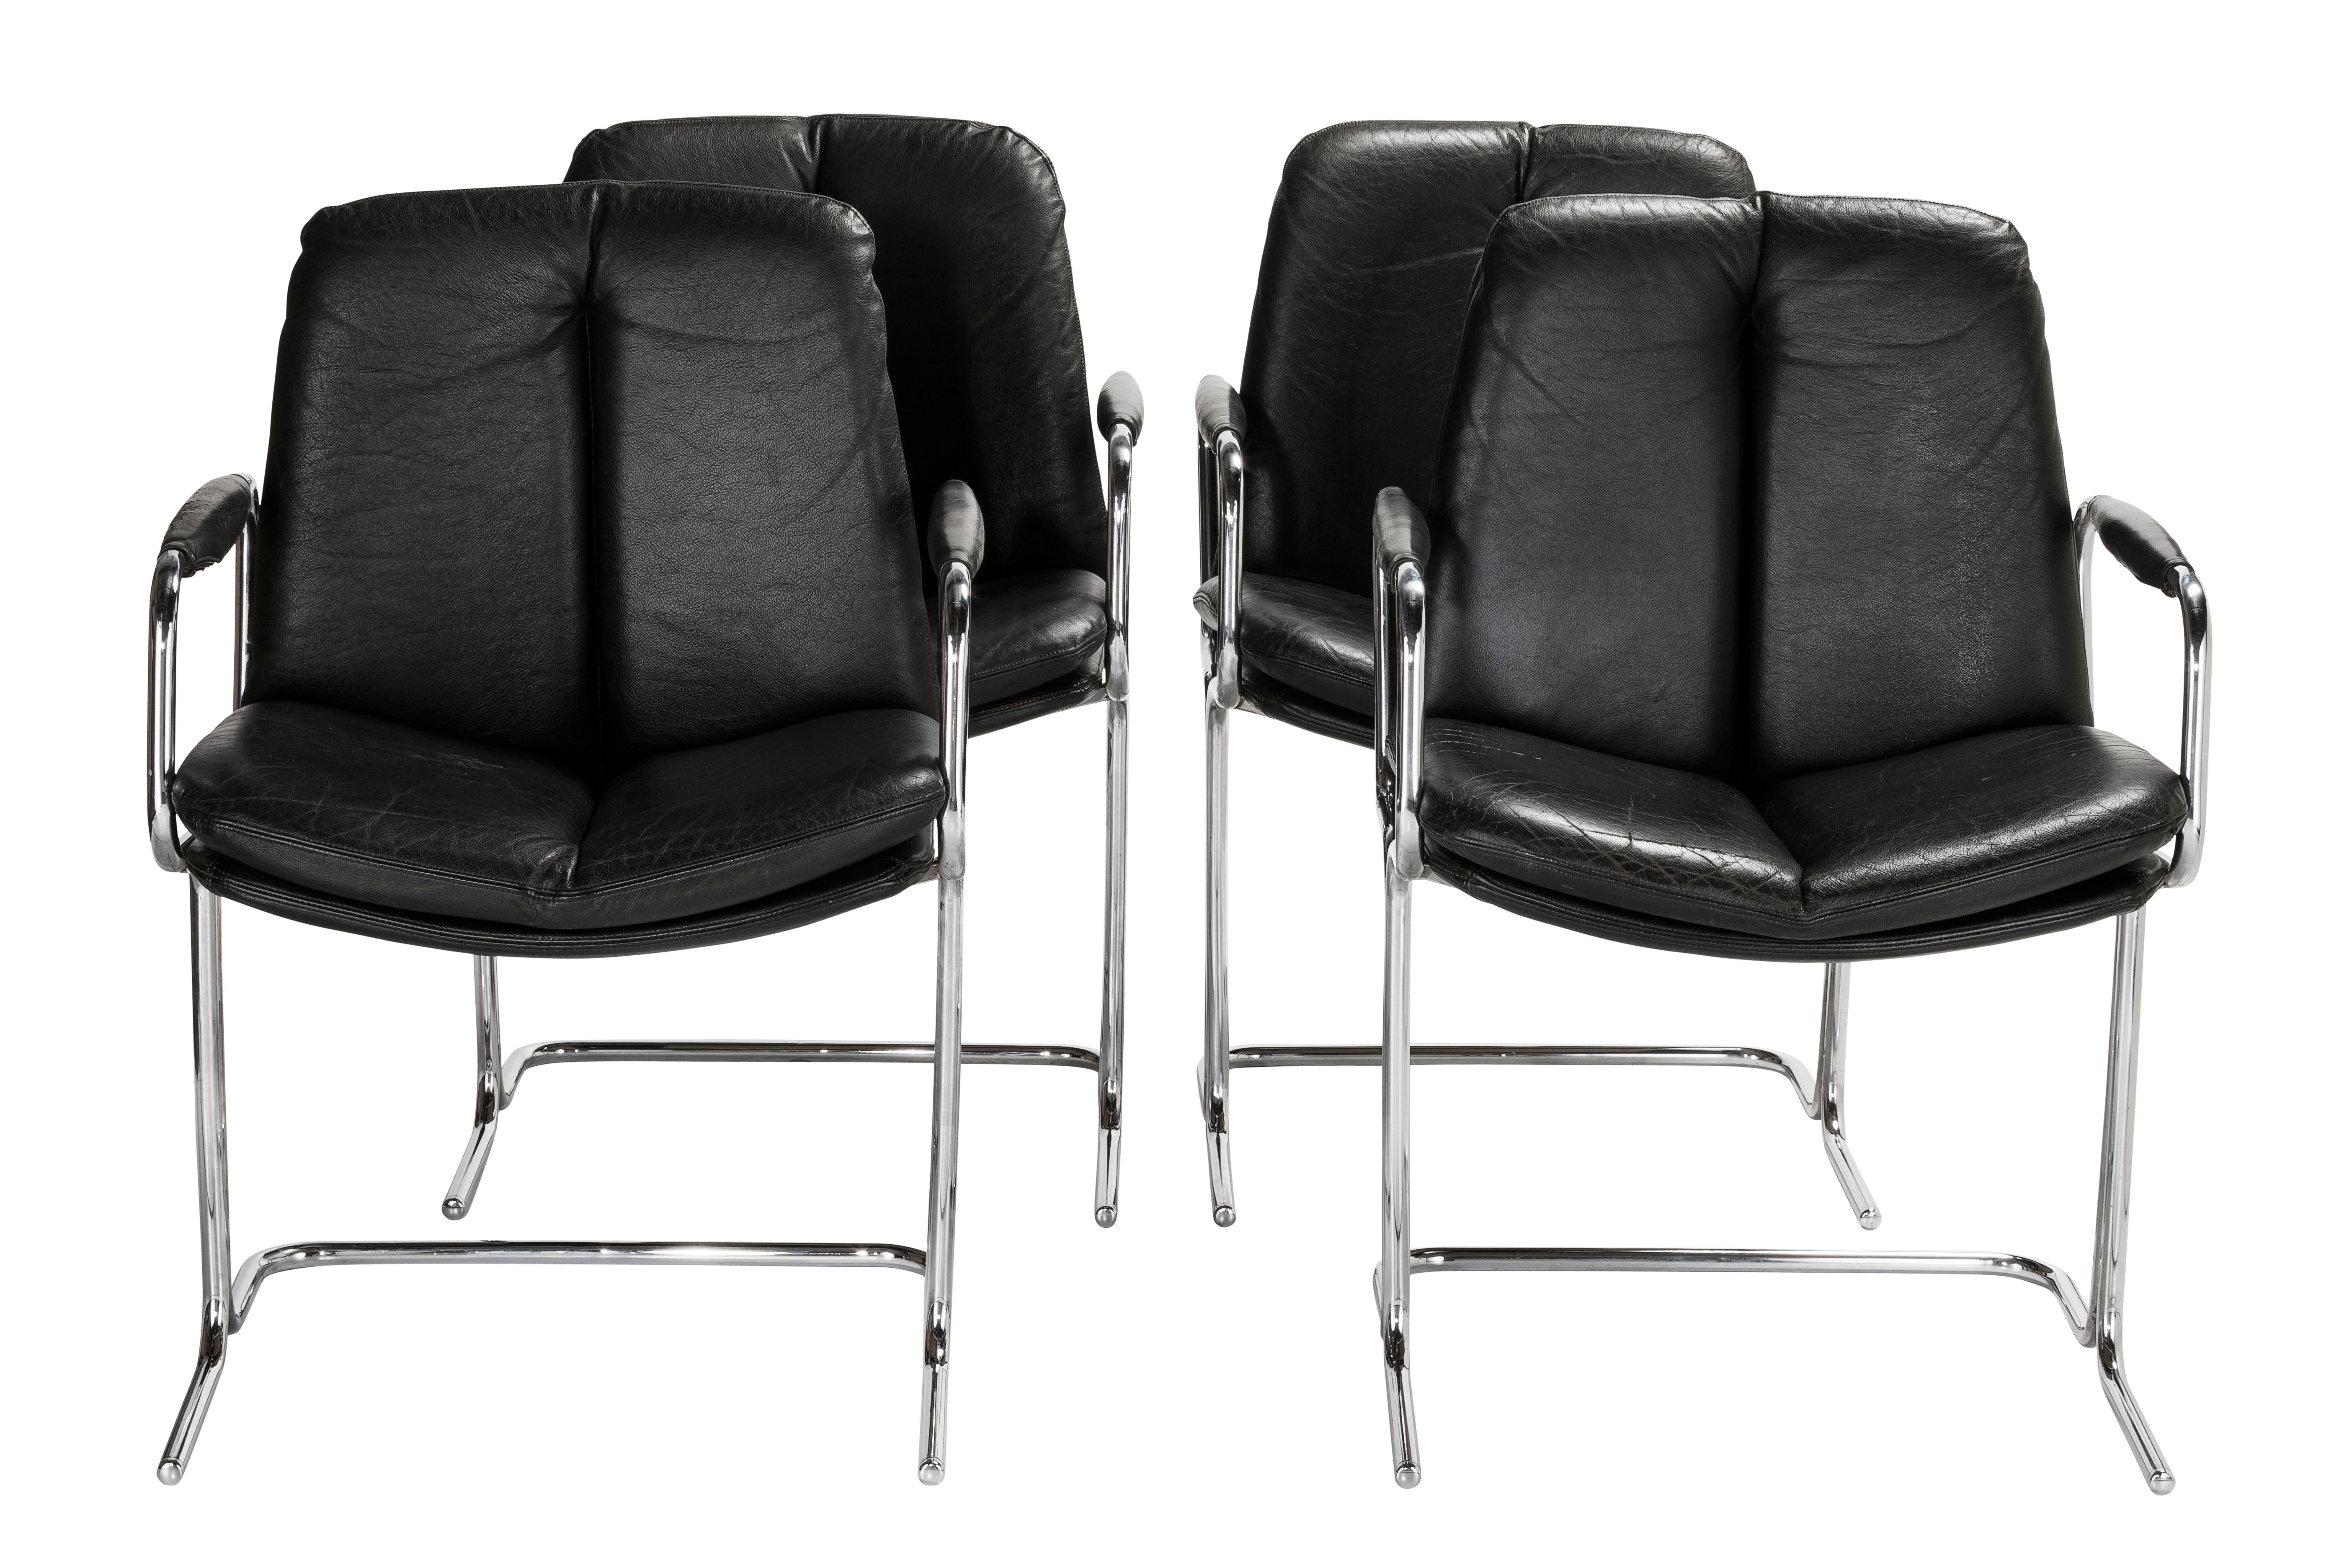 Set of 4 Pieff 'Eleganza' chrome steel and leather carver style chairs, manufactured in the late 1980s in England.
Pieff manufactured furniture from 1953-1983, when it closed at the height of the Industrial Recession in that year. Their furniture